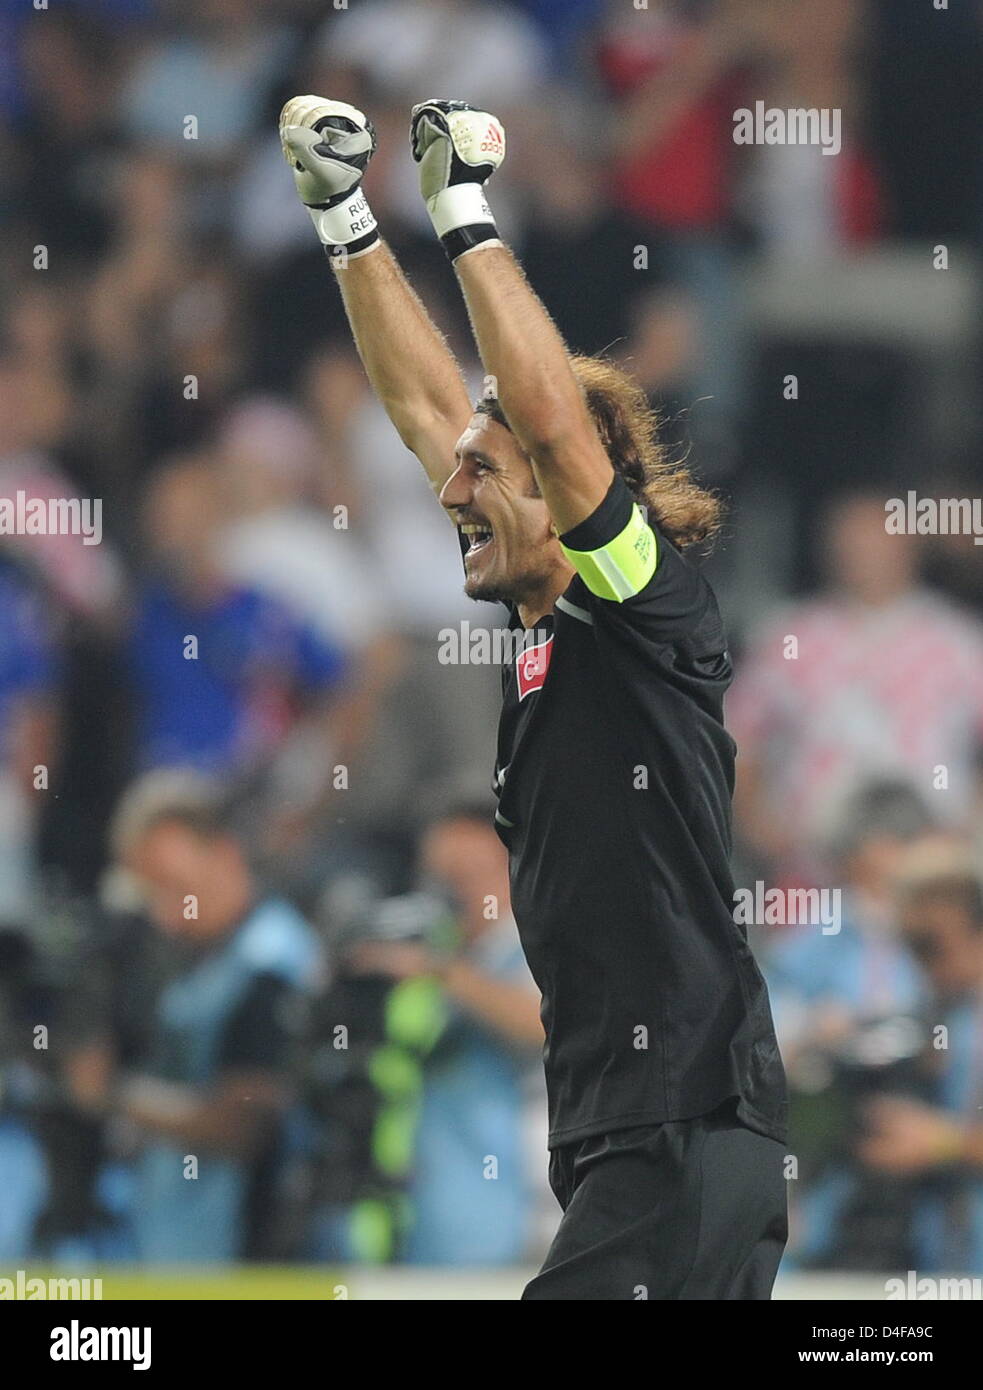 Goalkeeper Recber Ruestue of Turkey celebrates after the Penalty shootout of the UEFA EURO 2008 quarter final match between Croatia and Turkey at the Ernst Happel stadium in Vienna, Austria, 20 June 2008. Croatia lost 1-3 after penalty shootout. Photo: Achim Scheidemann dpa +please note UEFA restrictions particulary in regard to slide shows and ÒNo Mobile ServicesÒ +++###dpa###+++ Stock Photo